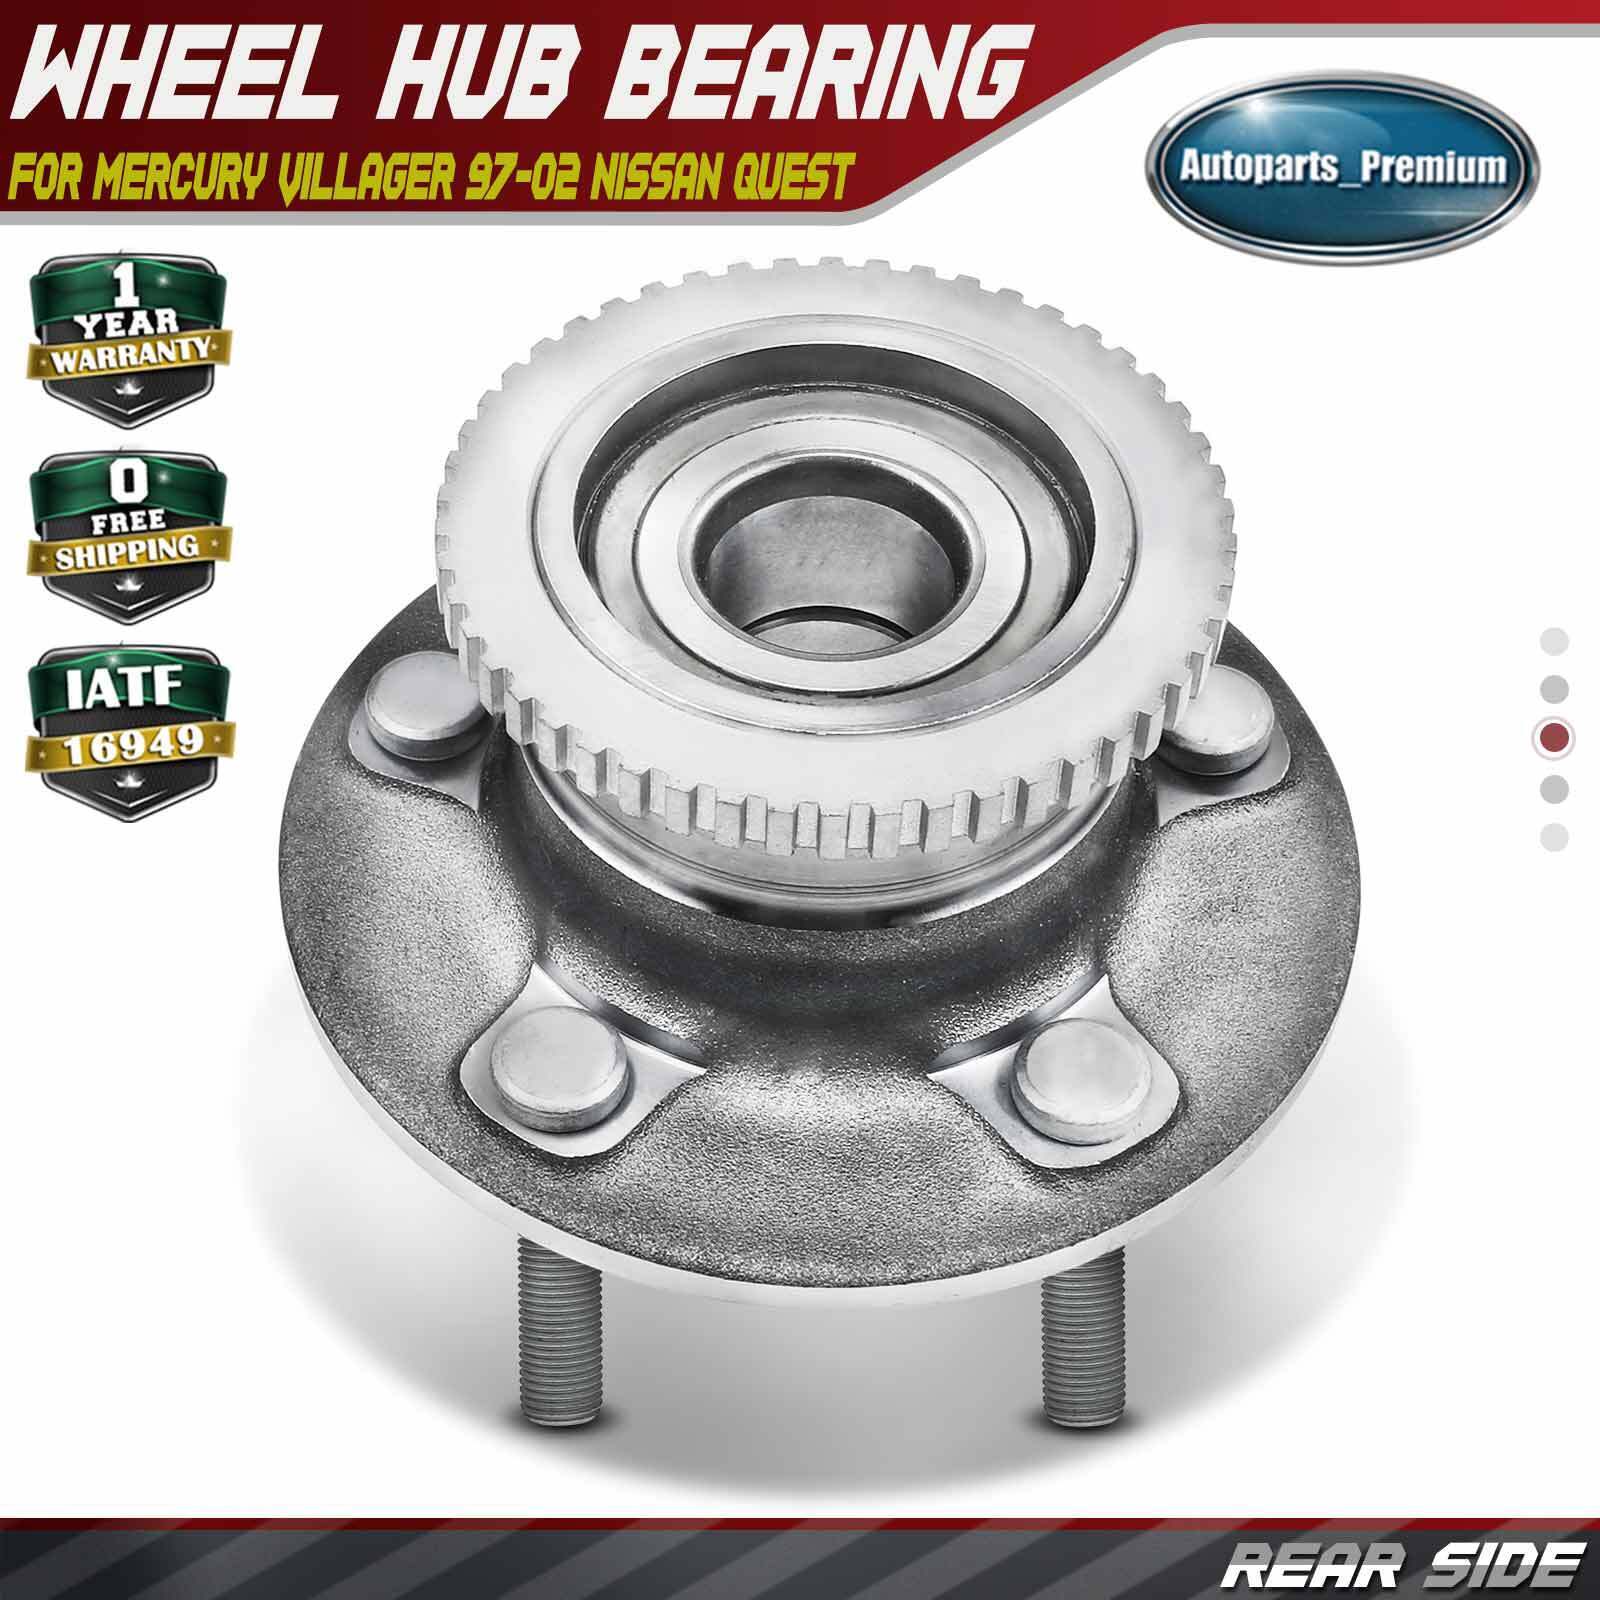 Rear Side Wheel Hub Bearing Assembly for Nissan Quest Mercury Villager 1997-2002